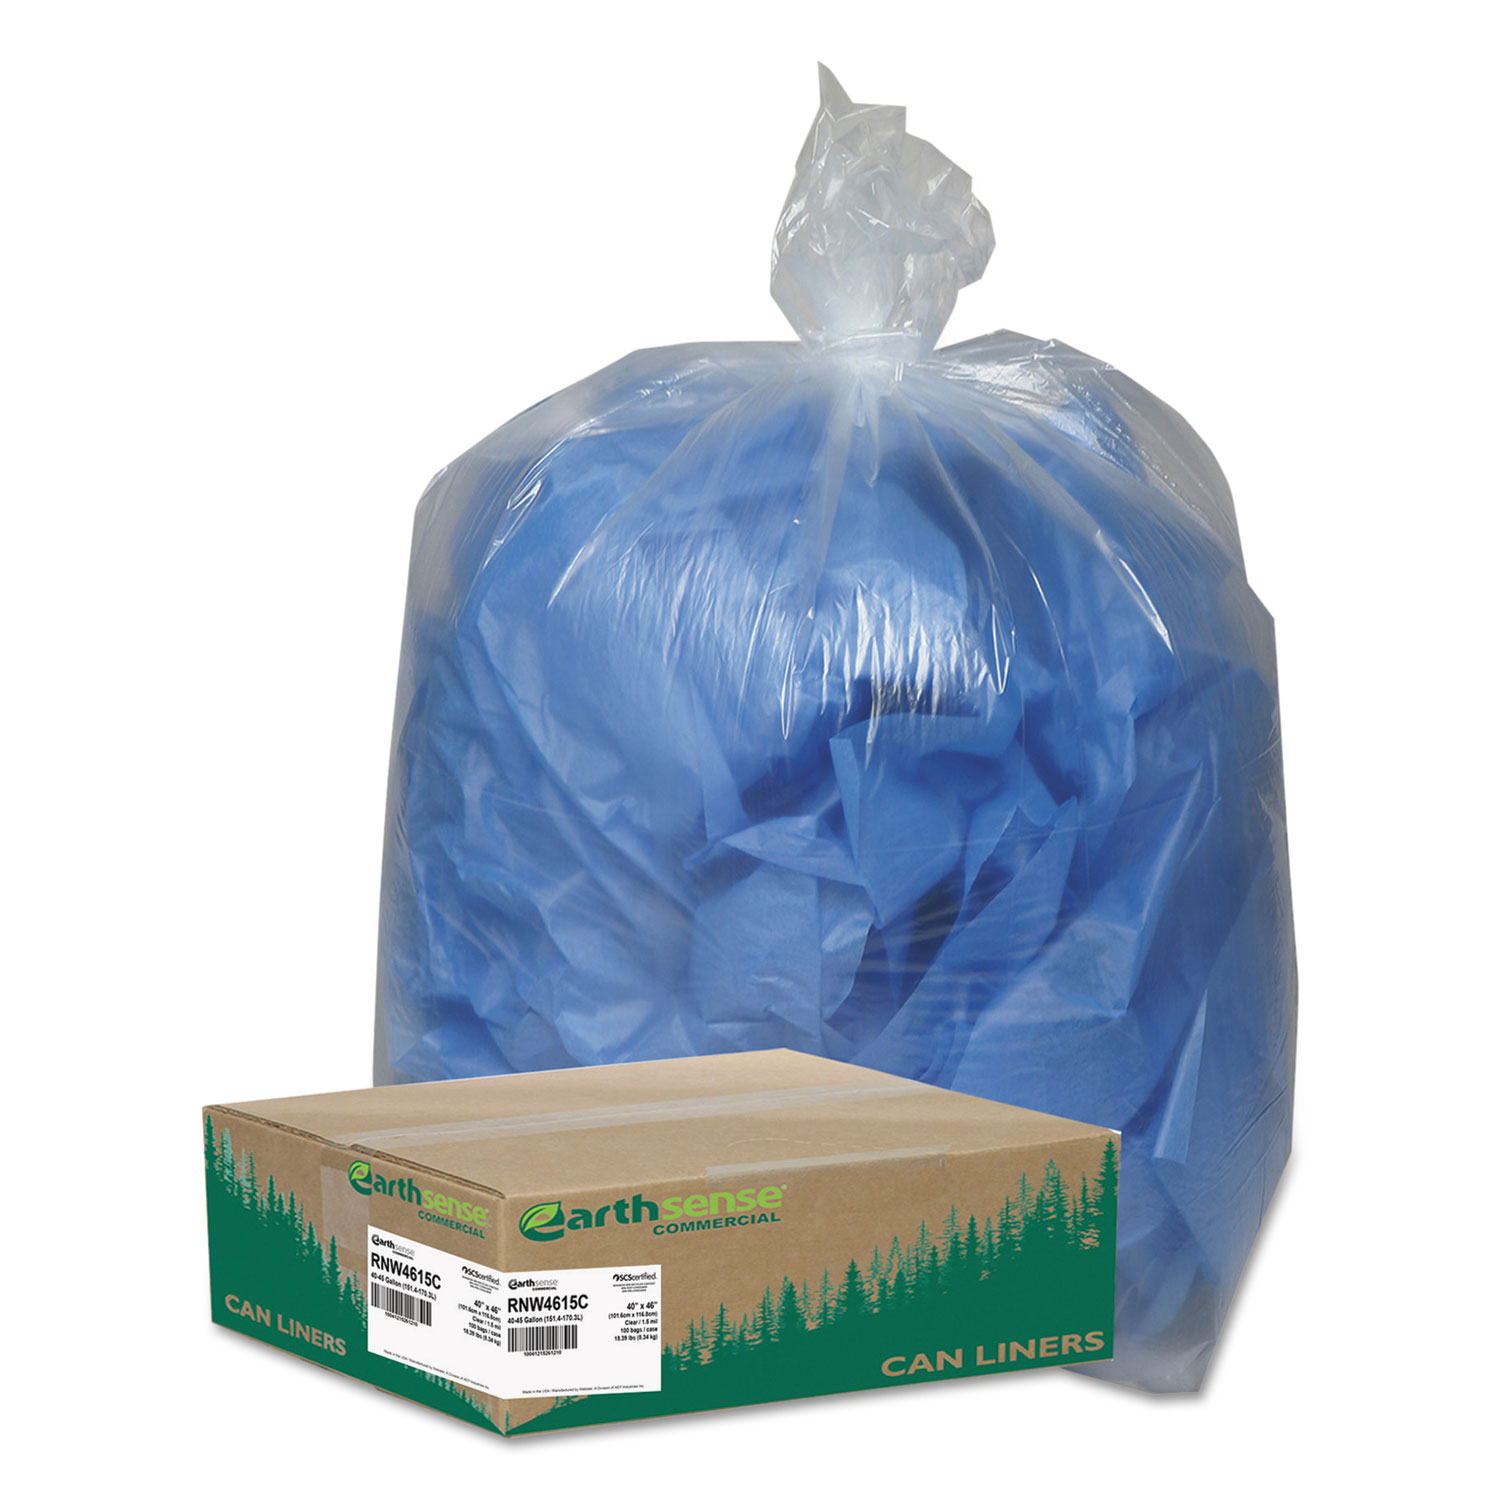  Earthsense Commercial RNW4615C Linear Low Density Clear Recycled Can Liners, 45 gal, 1.5 mil, 40 x 46, Clear, 100/Carton (WBIRNW4615C) 